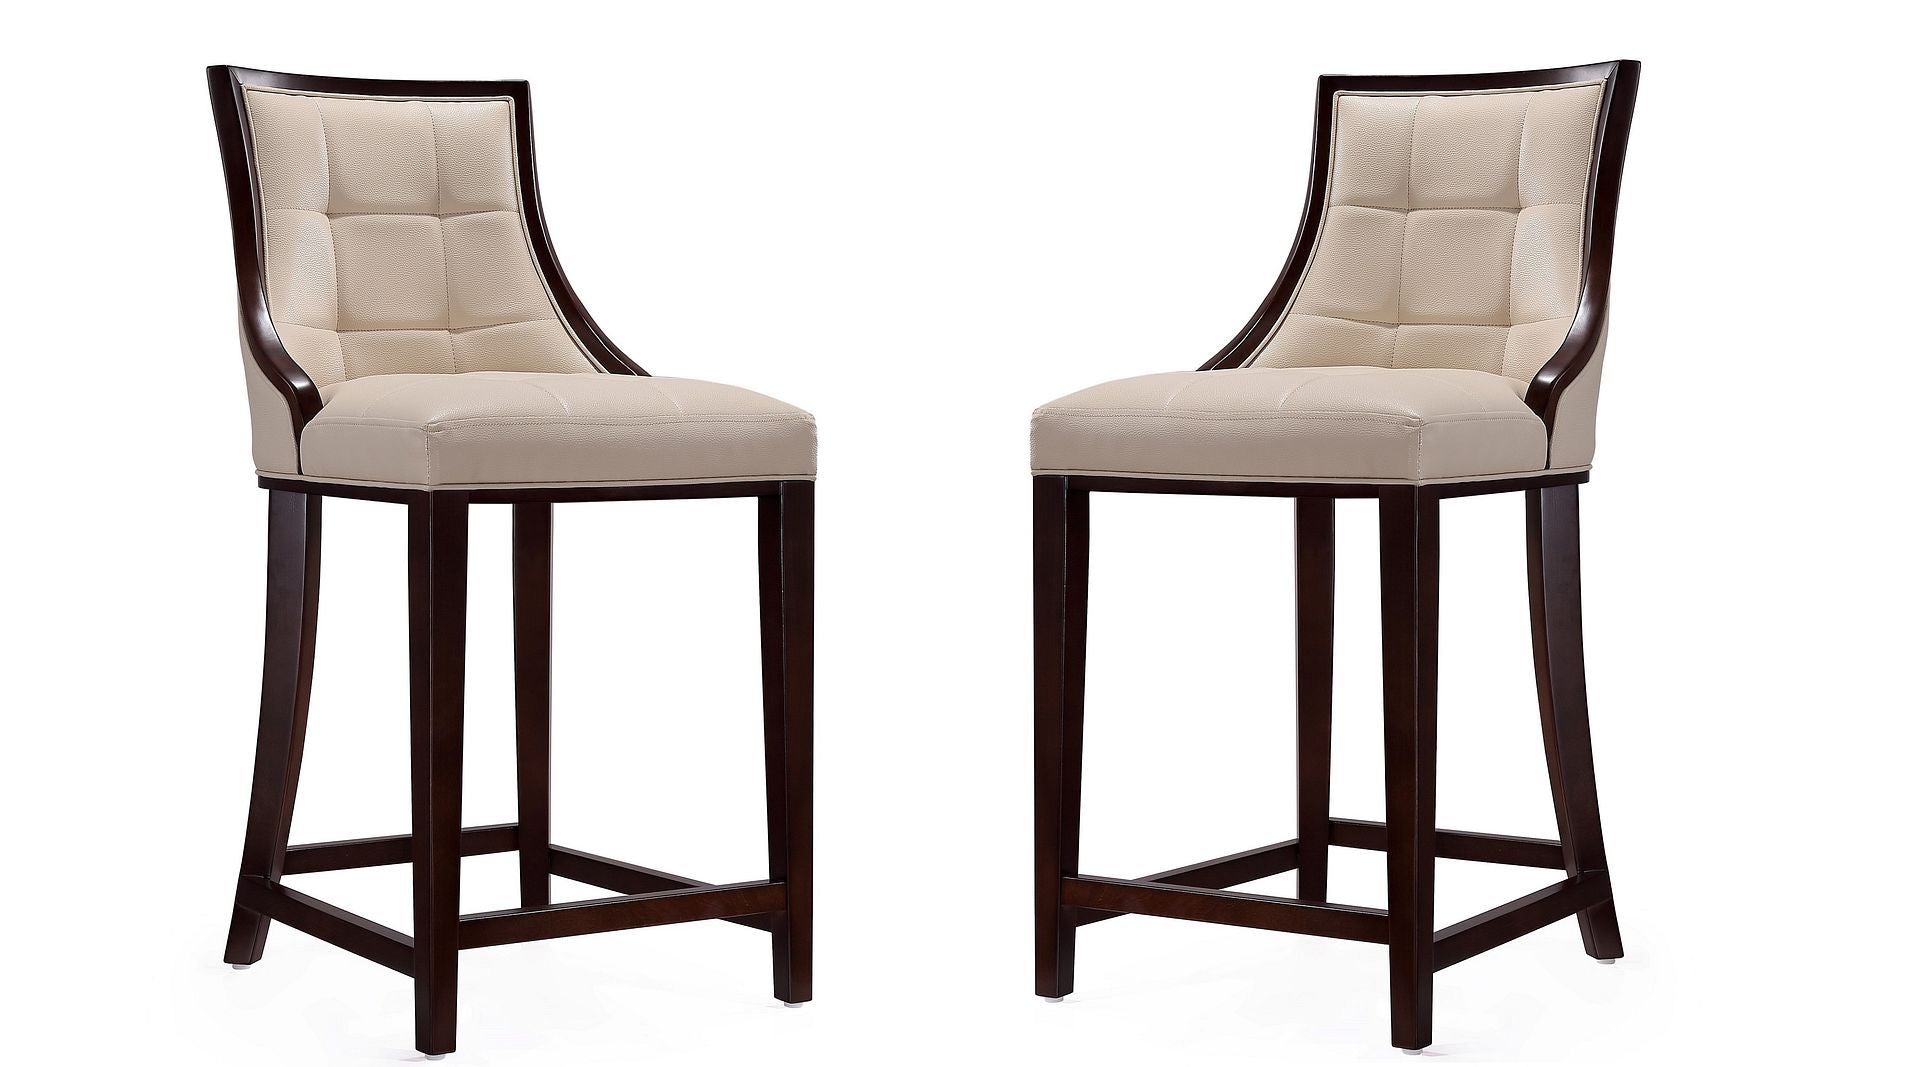 Fifth Avenue Counter Stool -Set of 2 - East Shore Modern Home Furnishings